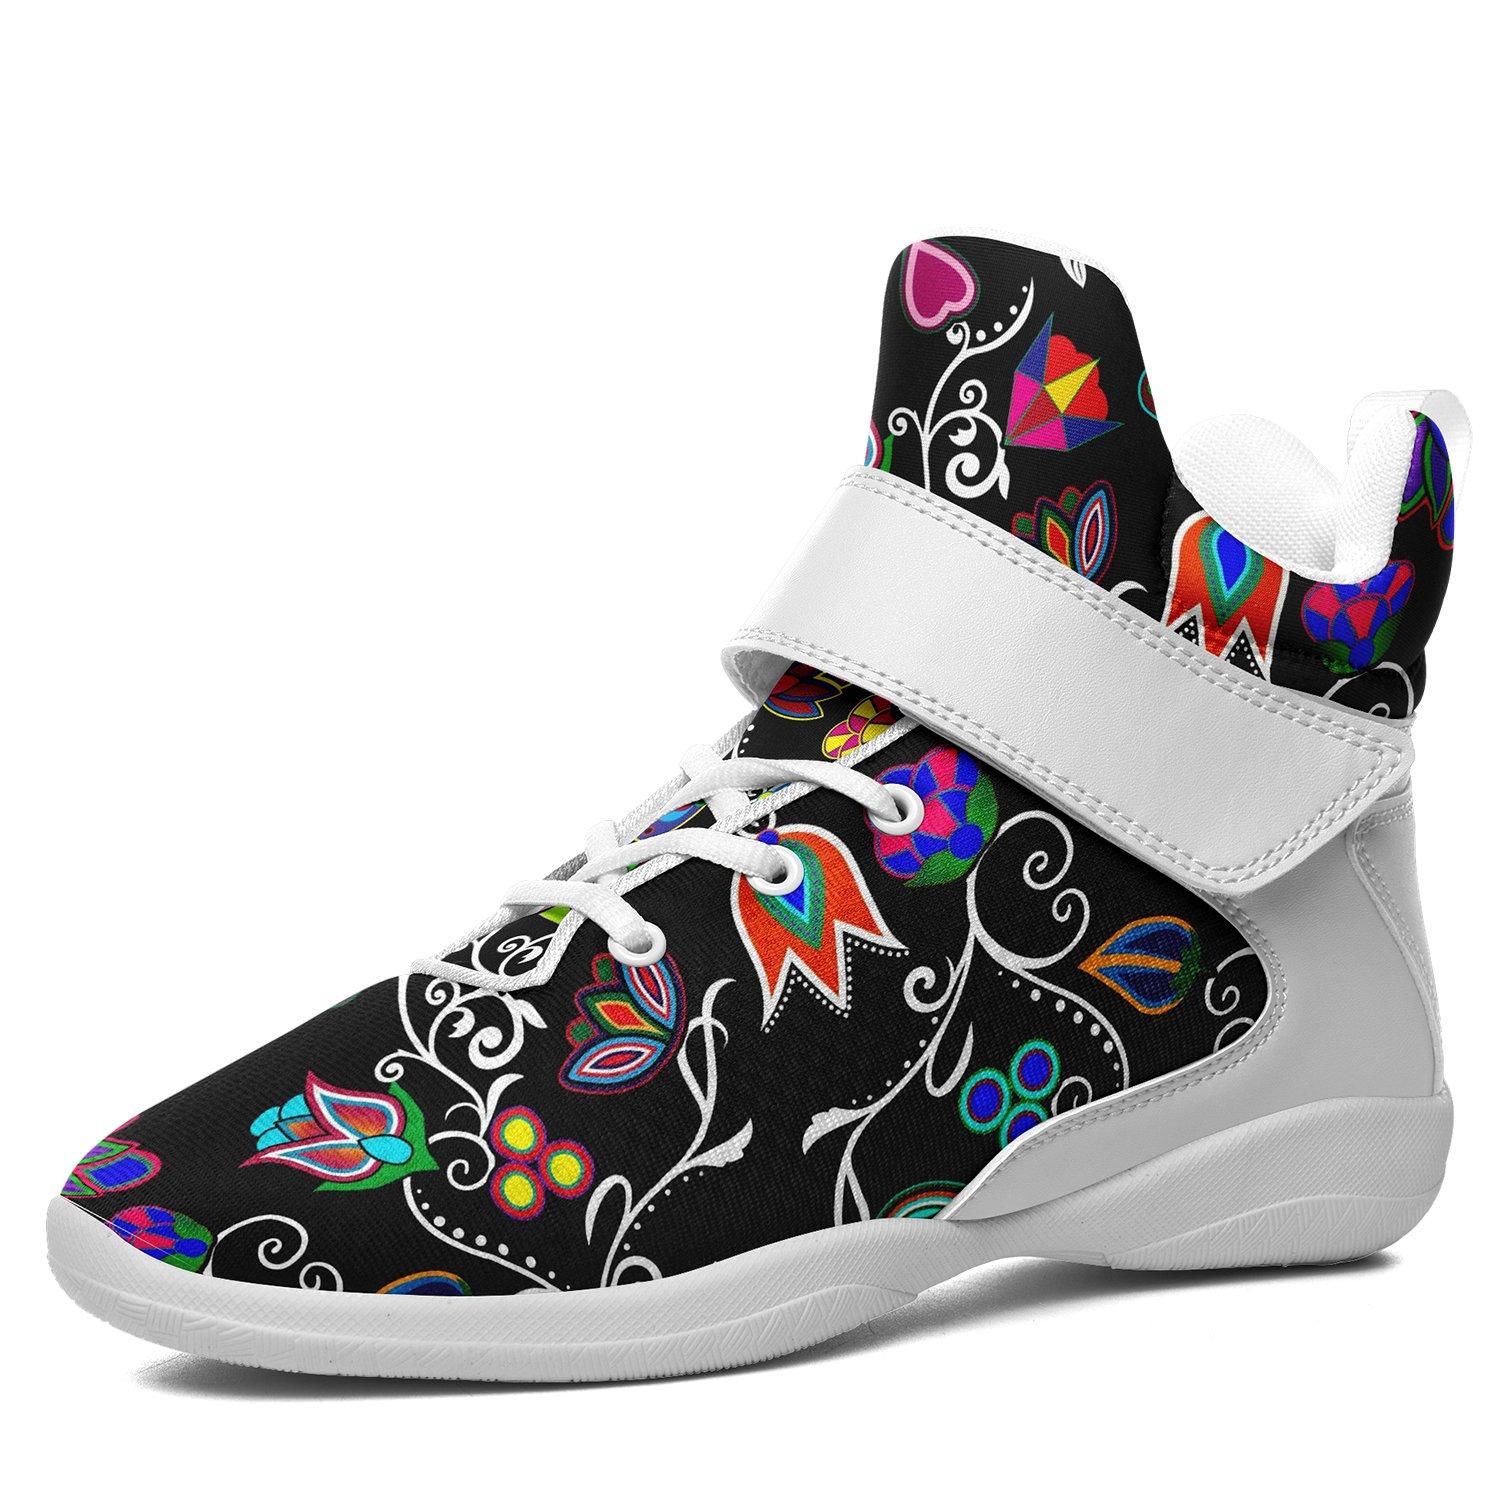 Indigenous Paisley Black Ipottaa Basketball / Sport High Top Shoes 49 Dzine US Women 4.5 / US Youth 3.5 / EUR 35 White Sole with White Strap 